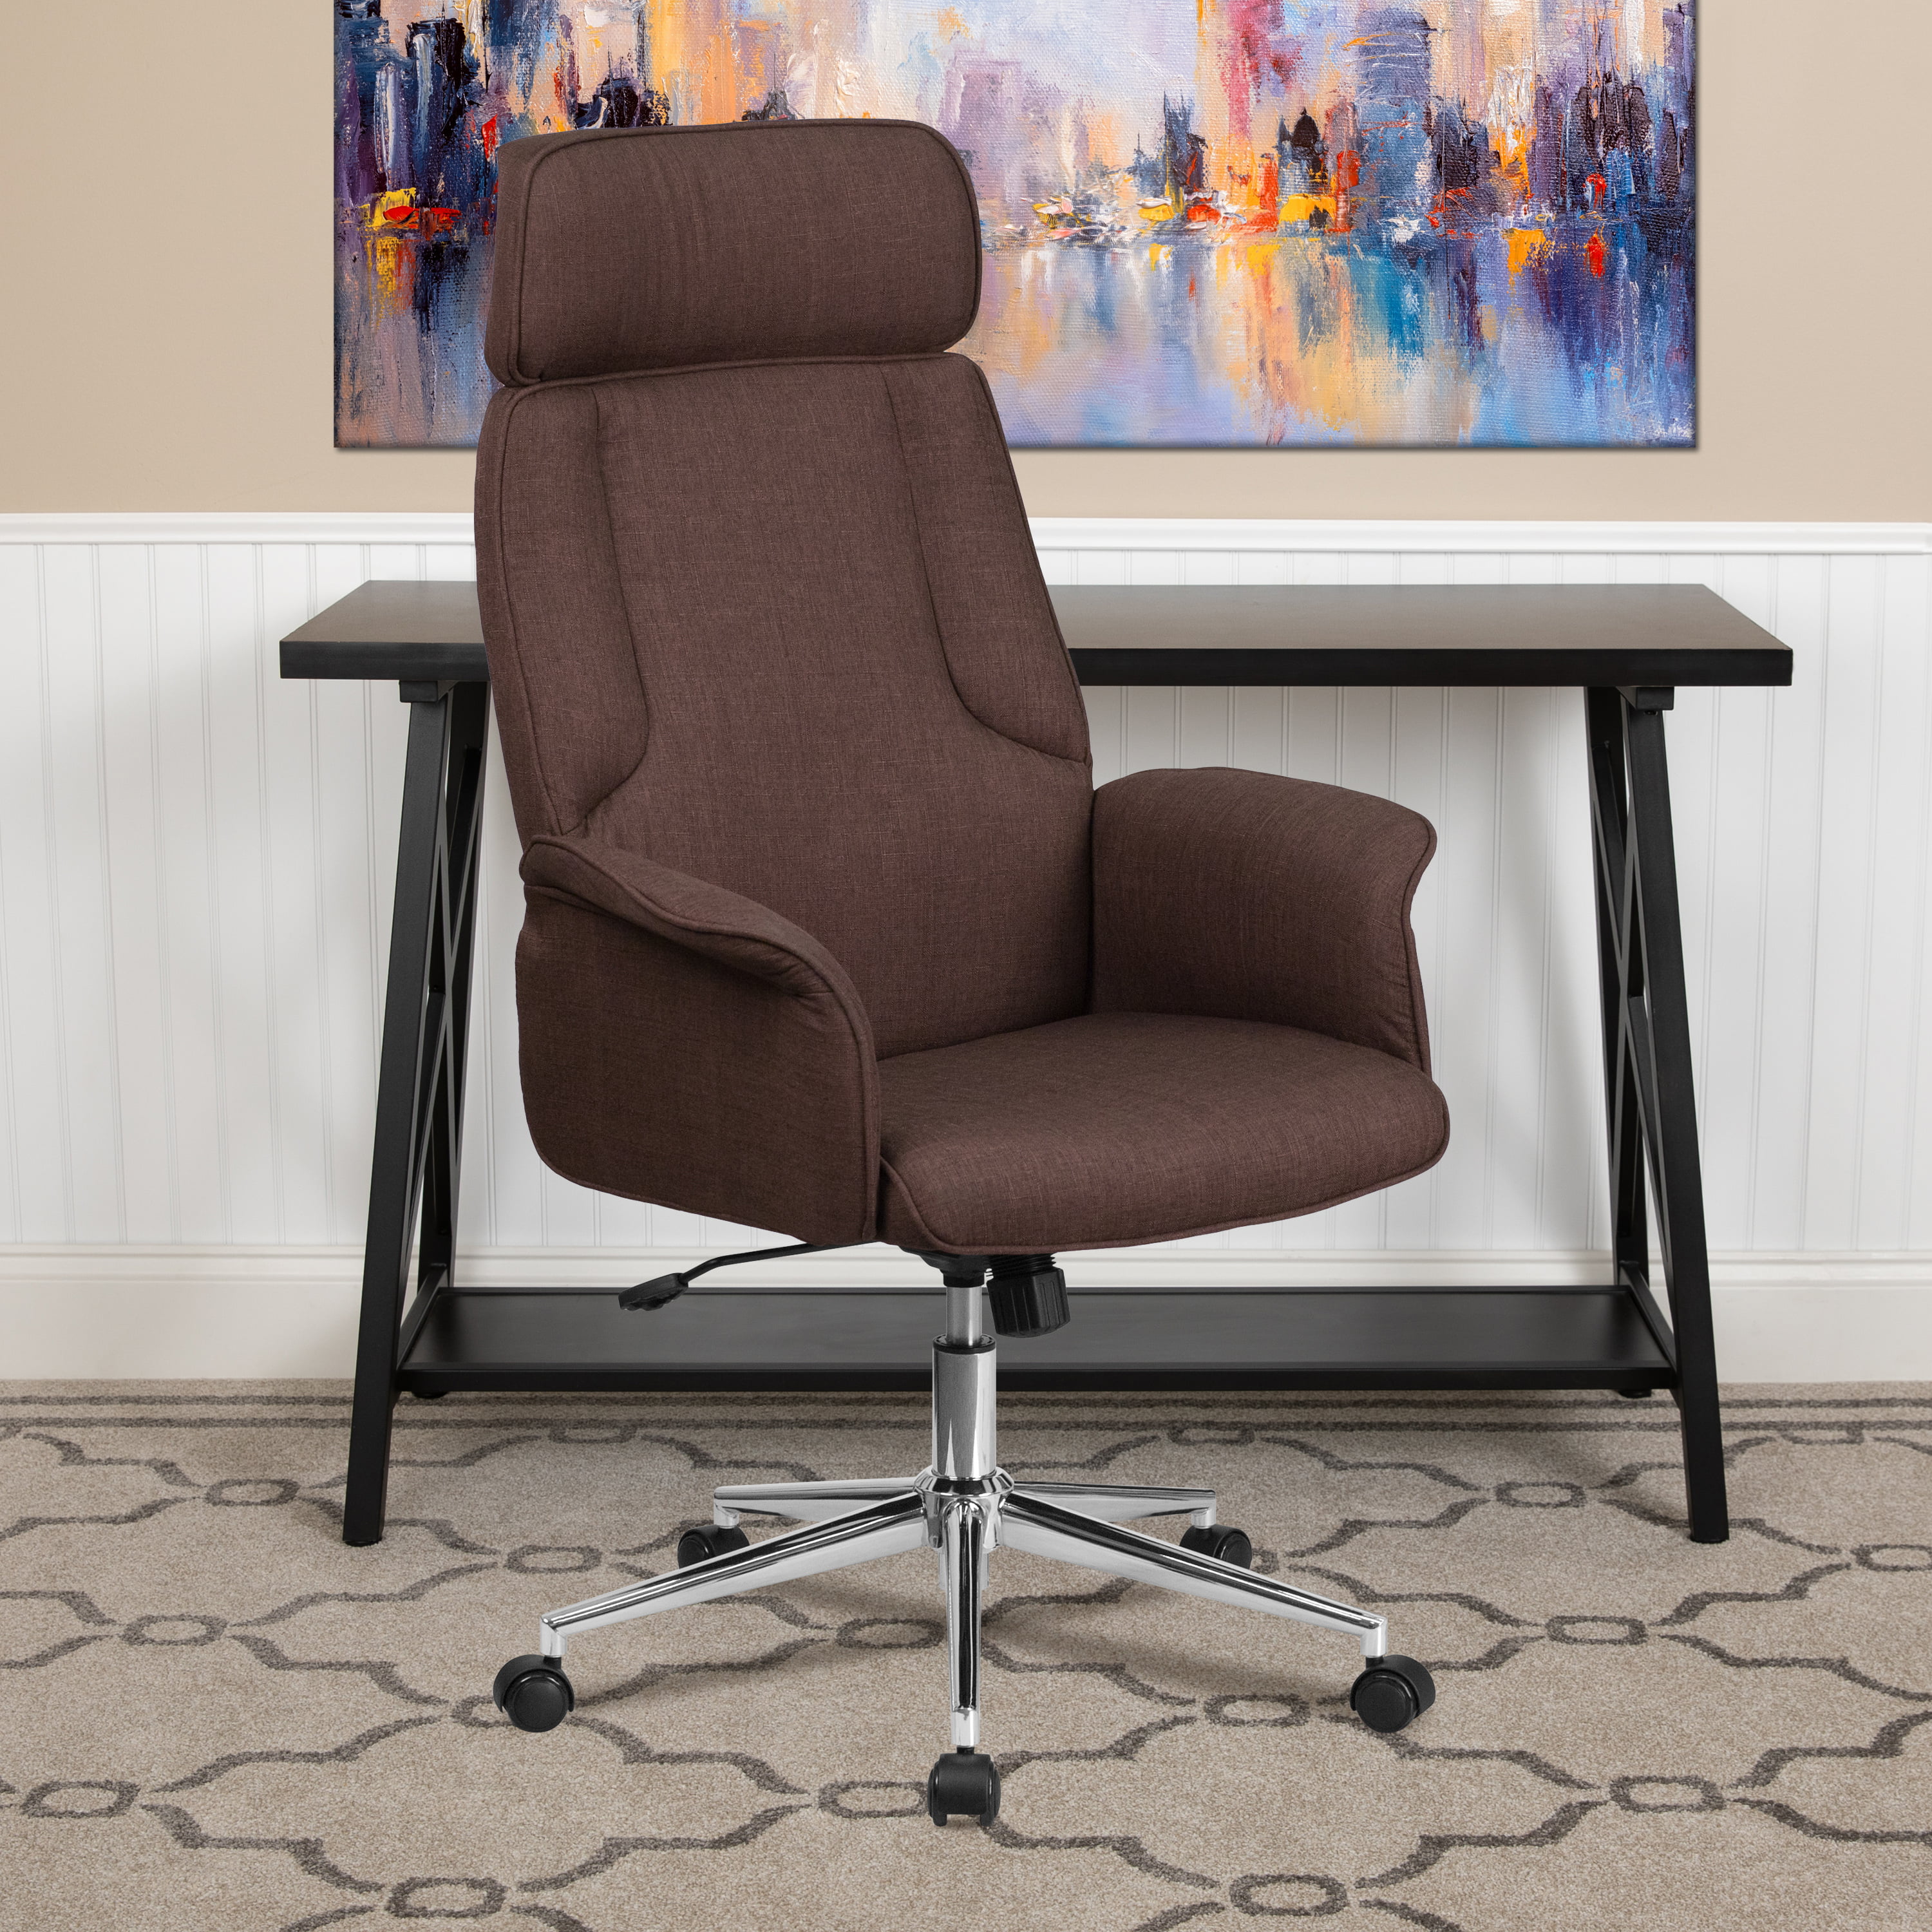 Details about   Office Task Desk Chair Swivel Home Comfort Adjustable Chairs with Flip-up Arms 